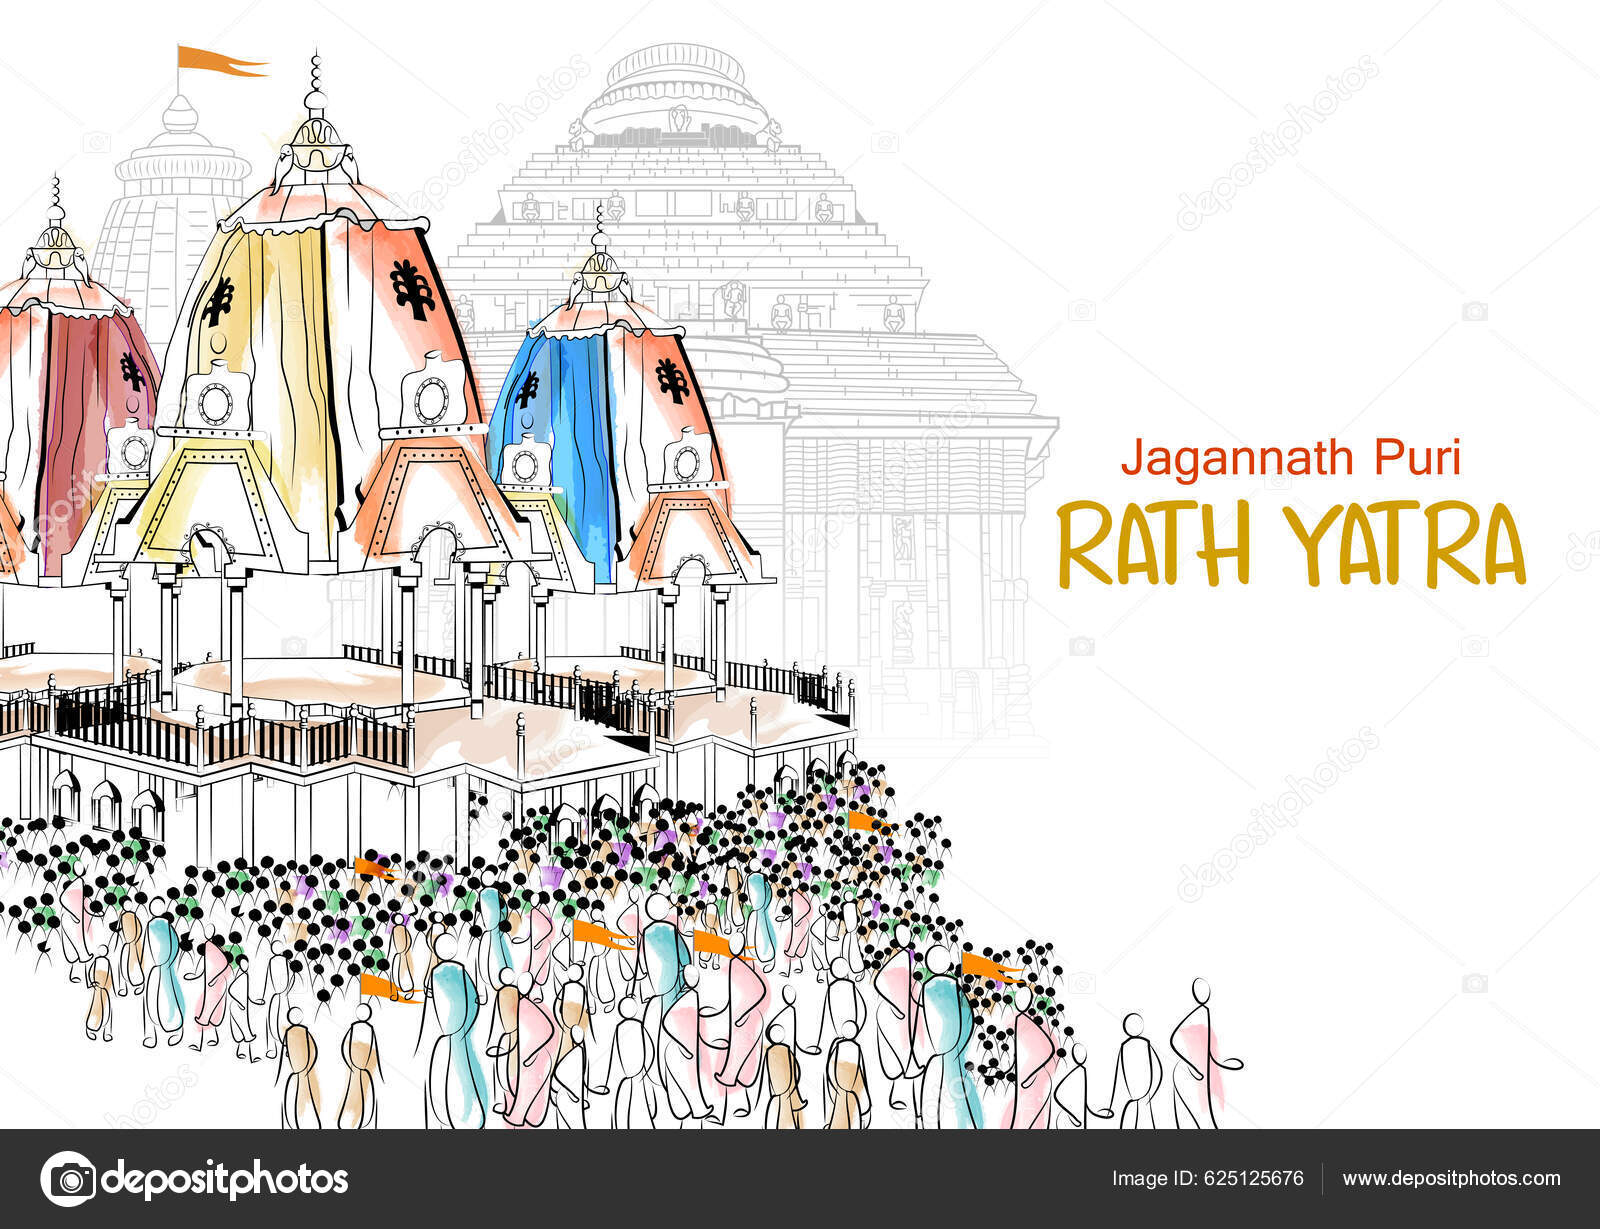 HOW TO DRAW RATH YATRA | DRAWING RATH YATRA FESTIVAL IN OIL PASTELS | JA...  | Soft pastels drawing, Easy canvas art, Oil pastel drawings